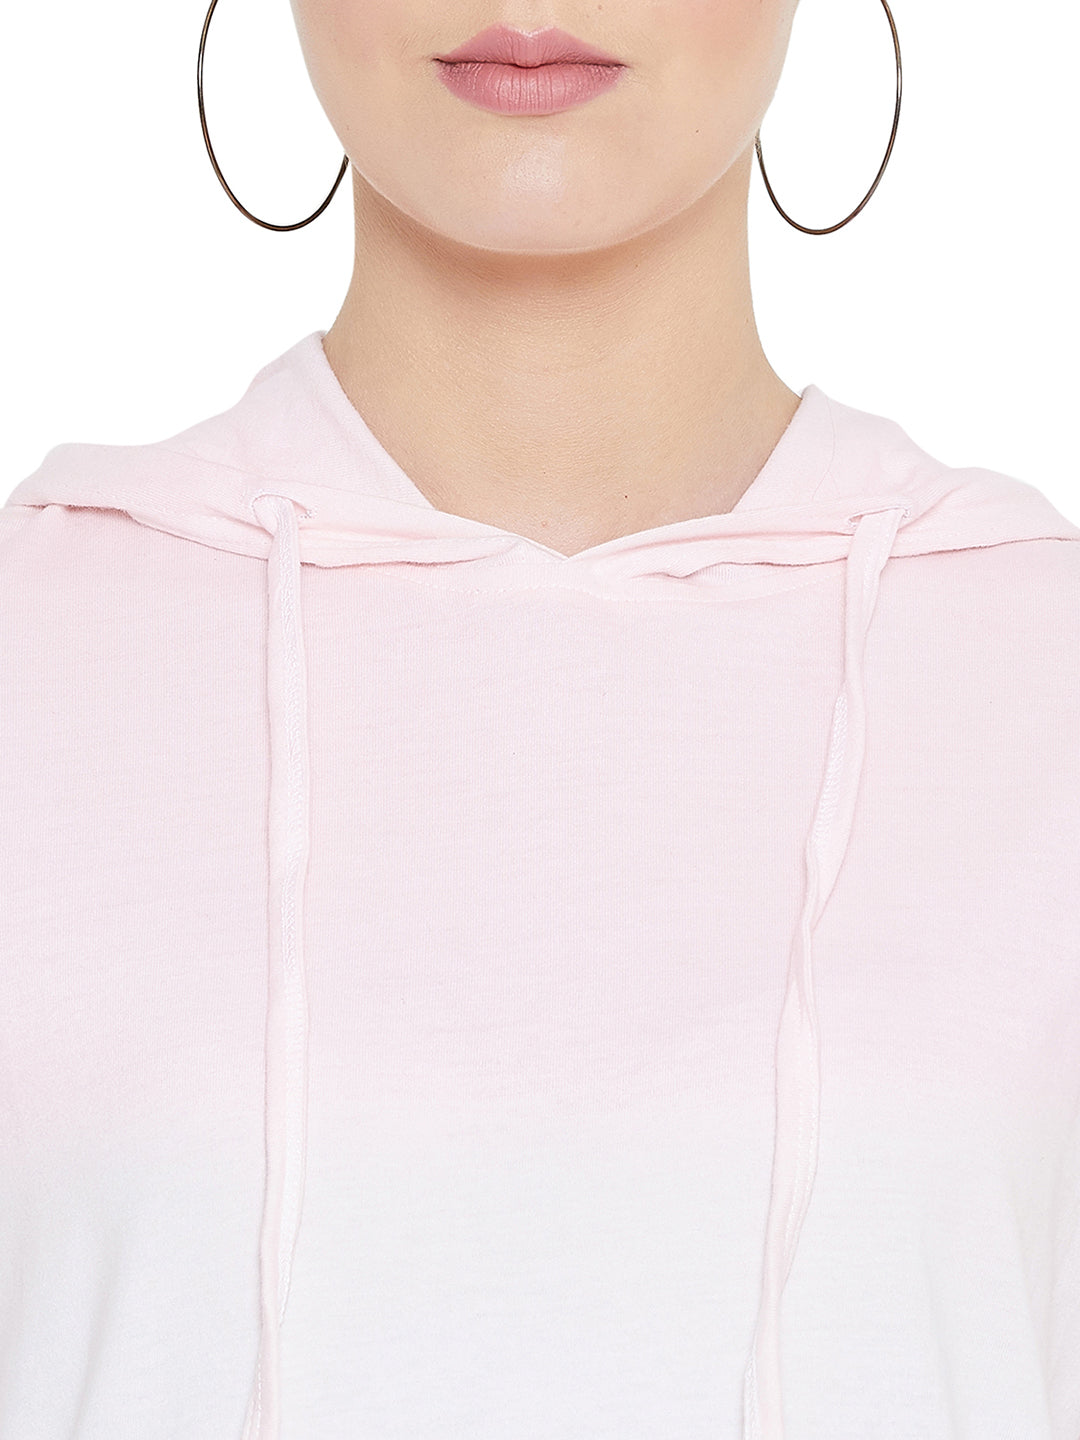 White/Pink Full Sleeves Ombre Dyed Hooded T-Shirt